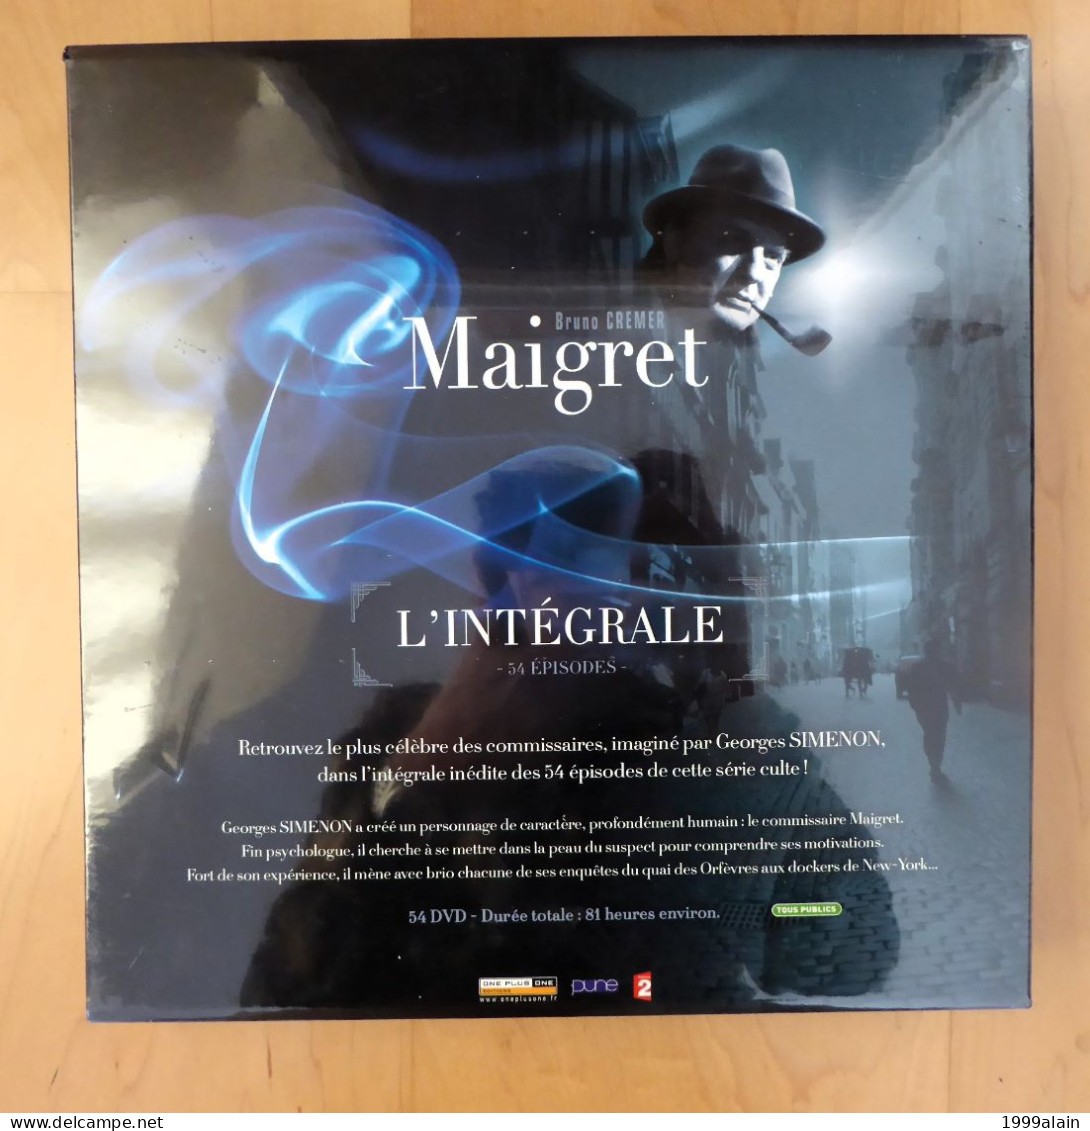 MAIGRET INTEGRALE 54 DVD - EDITION SPECIALE FNAC - NEUF SOUS CELLOPHANE - TV Shows & Series